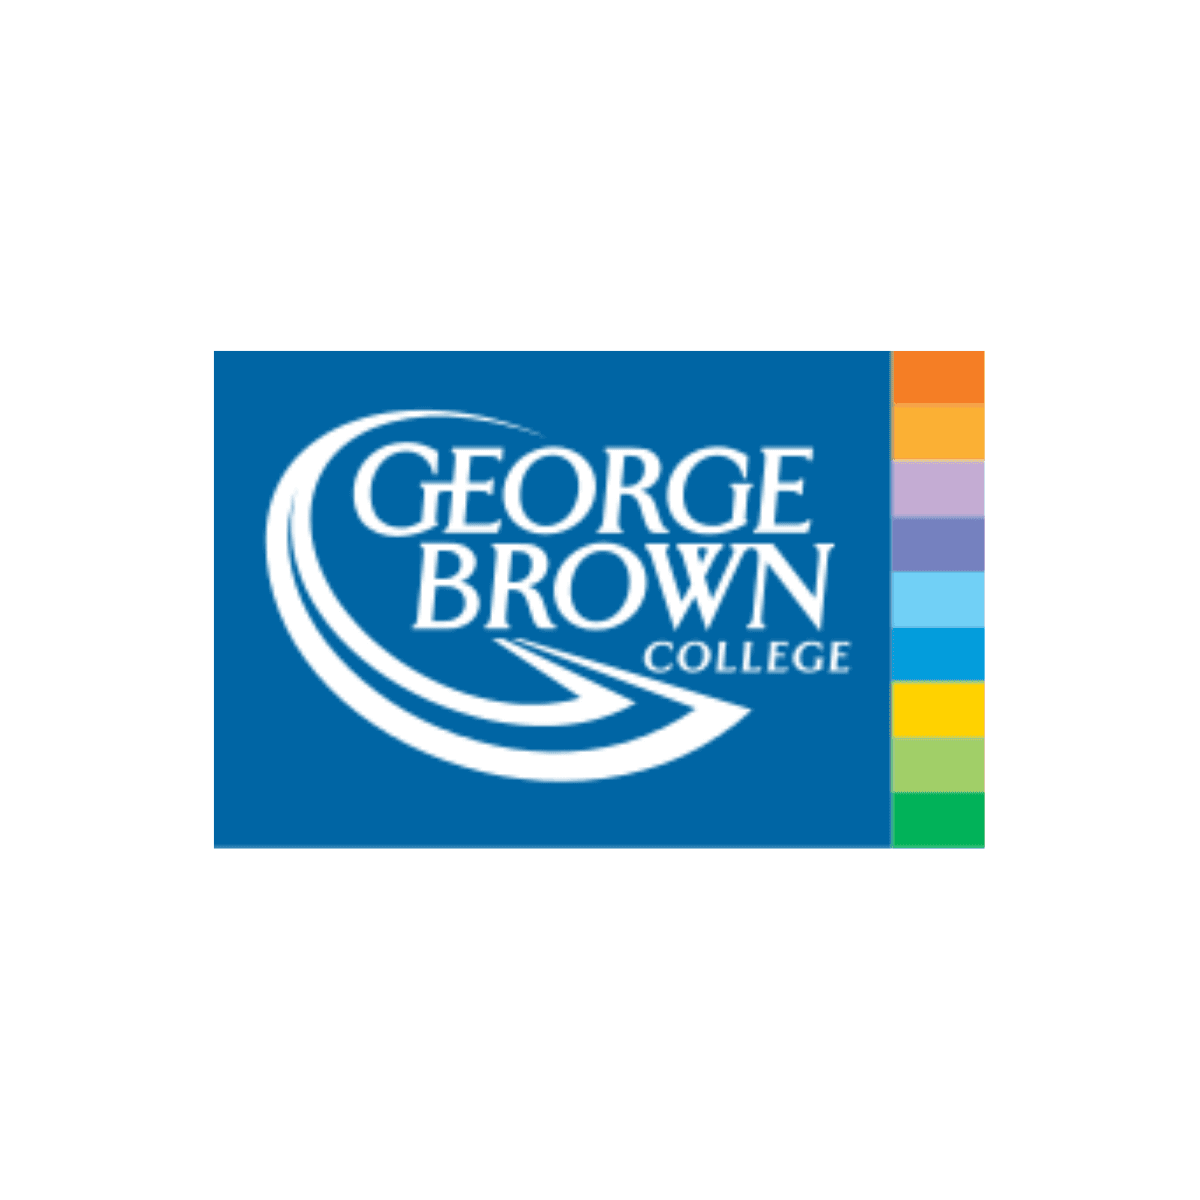 Logo image of George Brown College - Waterfront